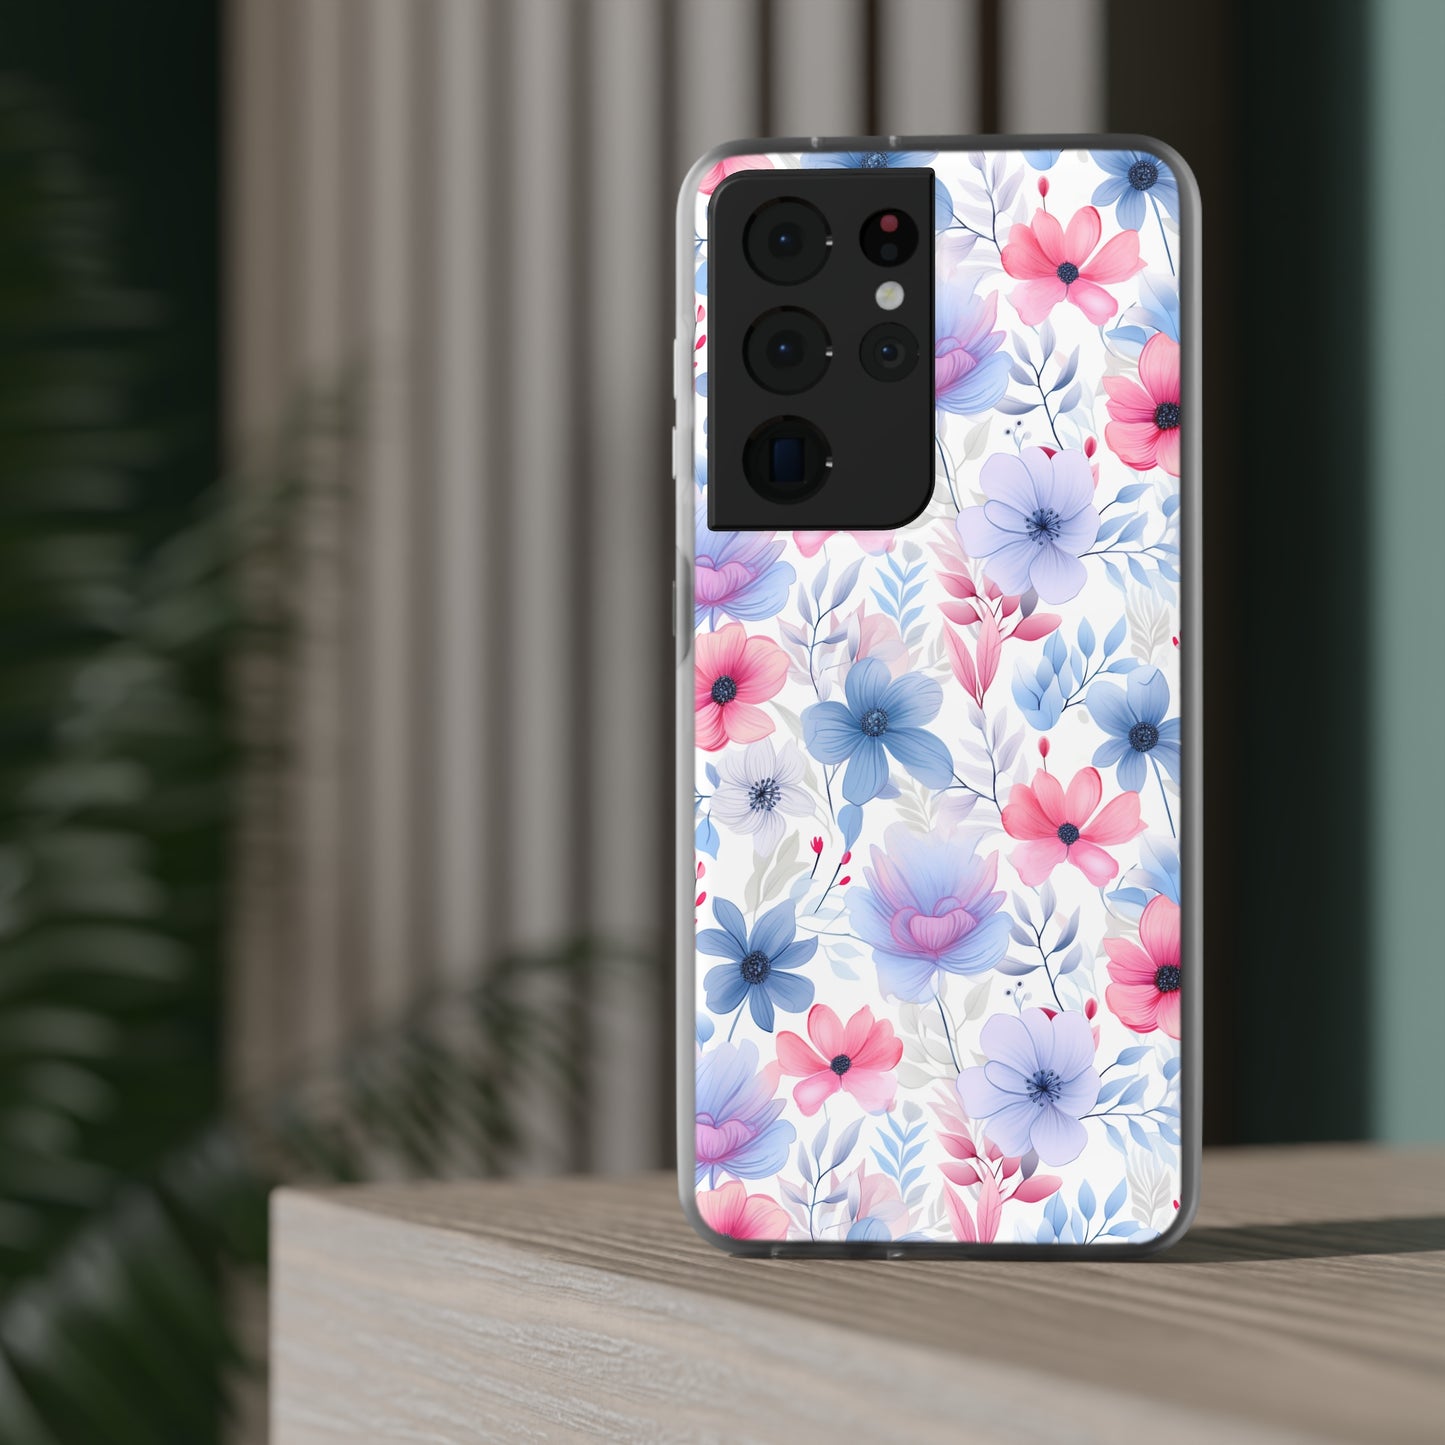 Floral Whispers - Soft Hues of Violets, Pinks, and Blues - Flexi Phone Case Phone Case Pattern Symphony Samsung Galaxy S21 Ultra with gift packaging  